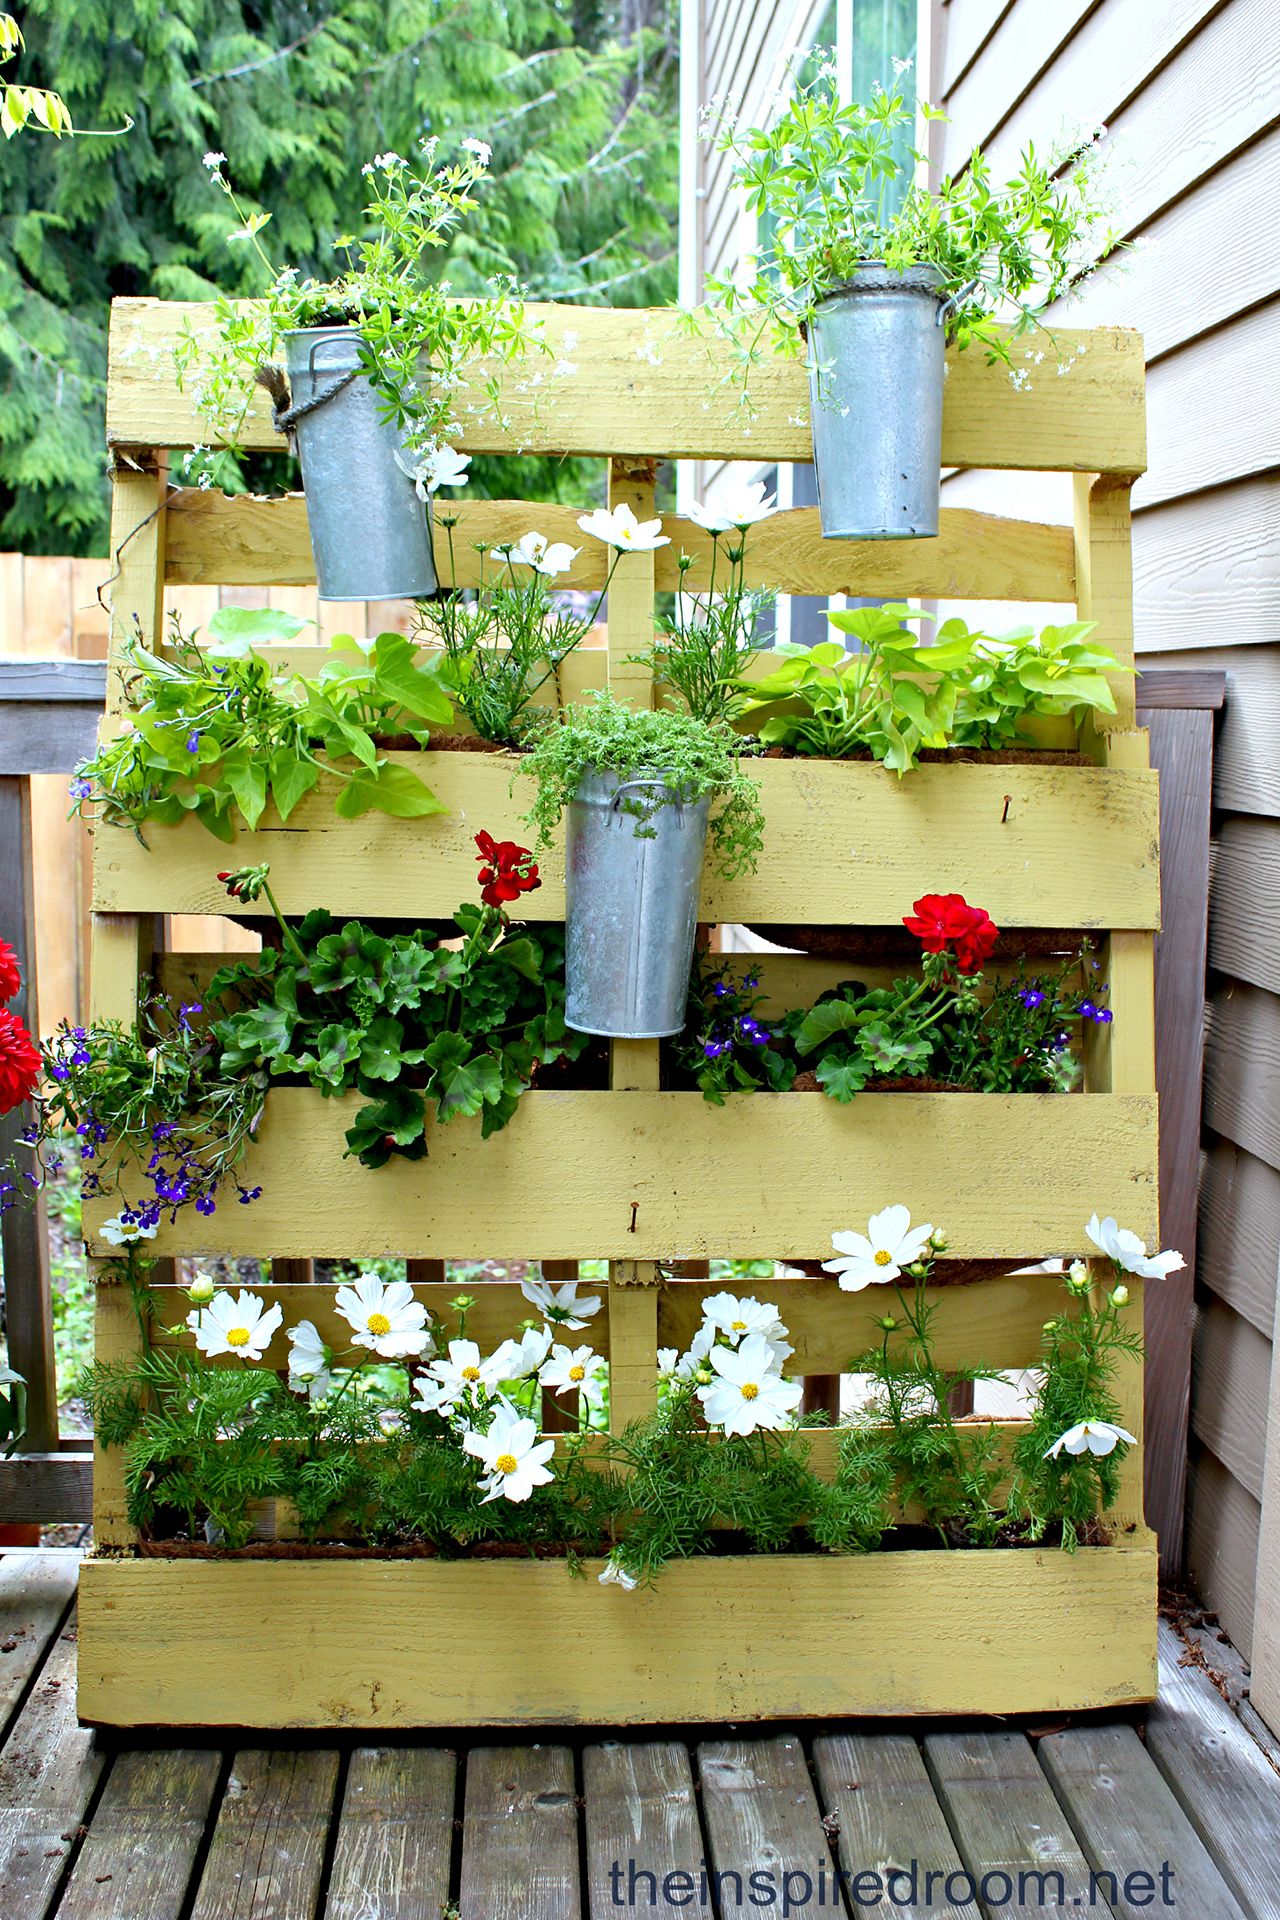 09-take-pallet-gardening-vertical-with-this-simple-design-vertical-gardens-homebnc